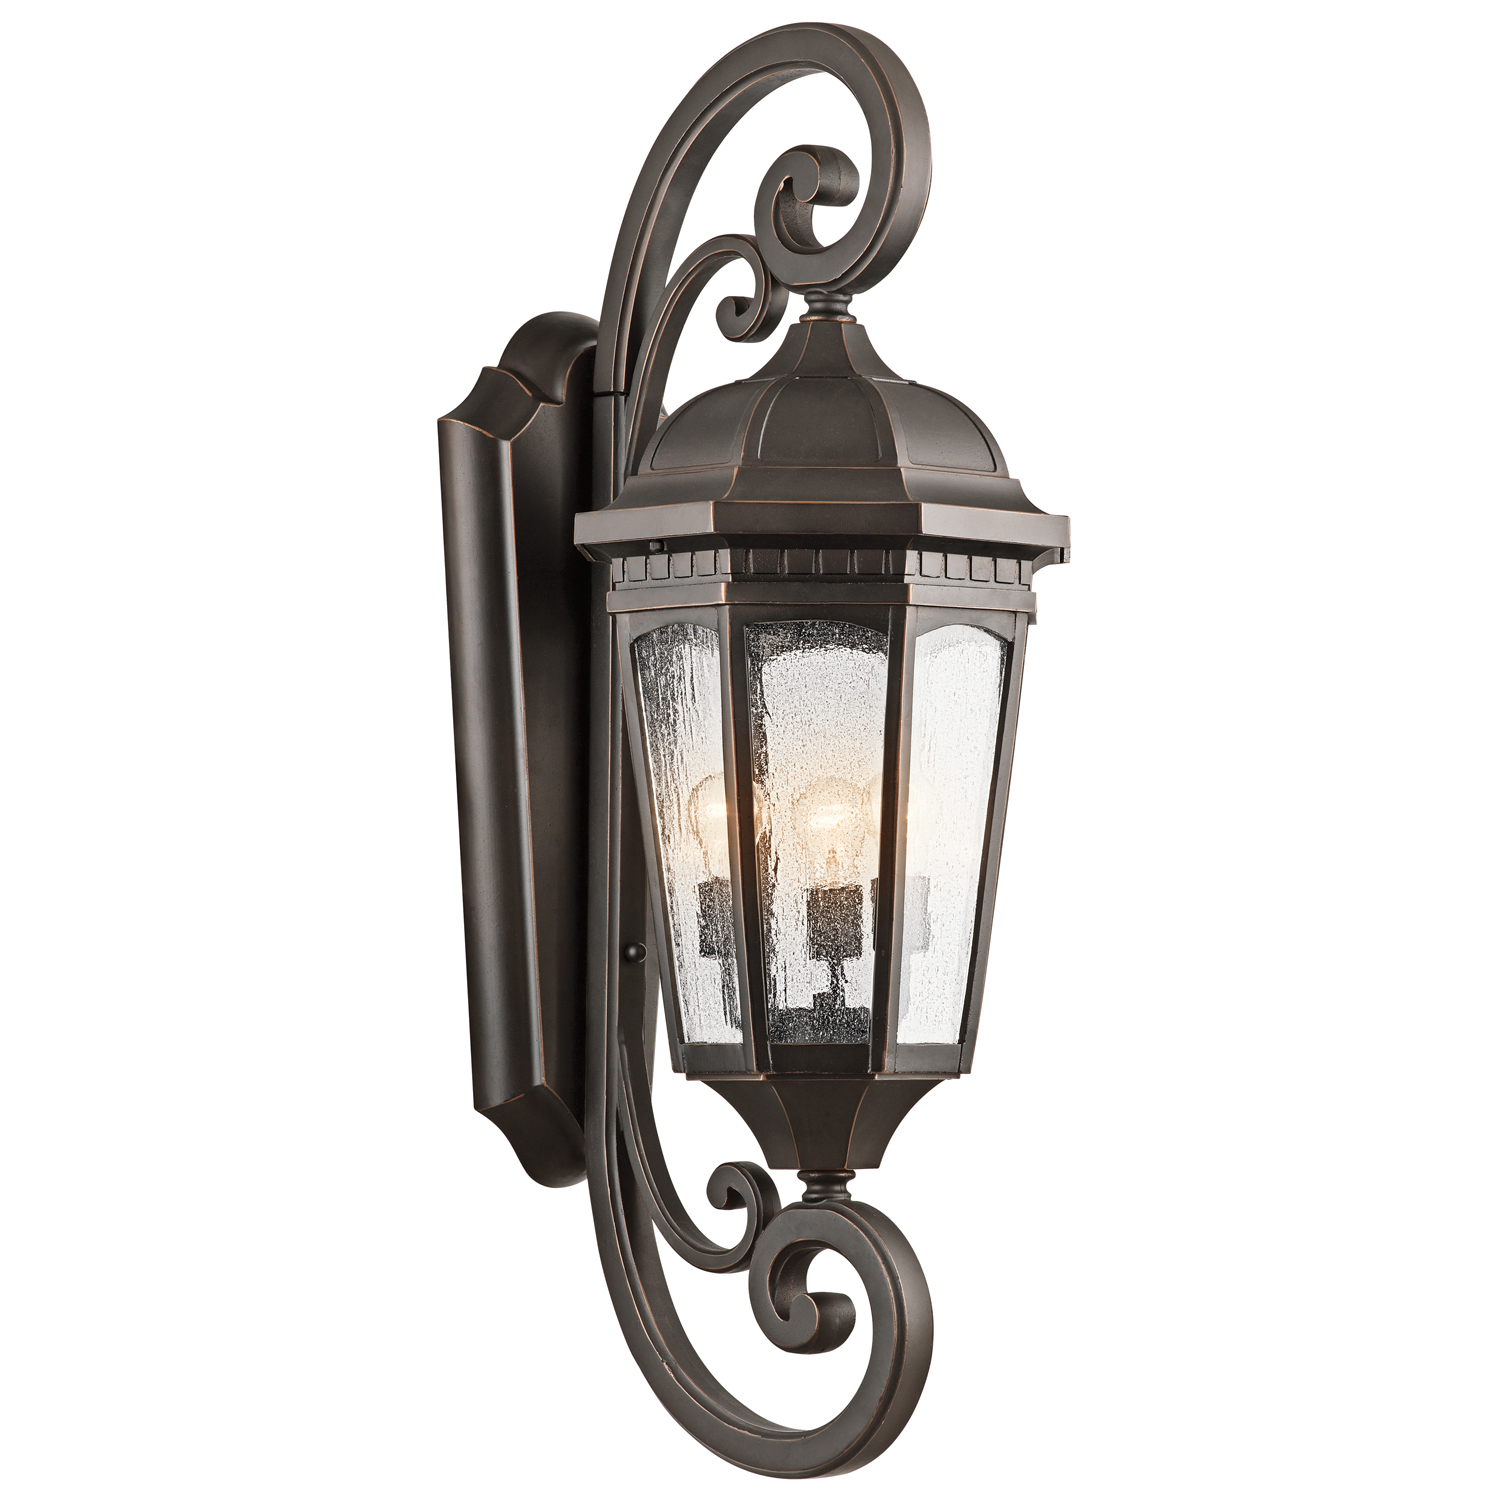 Uncluttered and traditional, this 3 light outdoor wall lantern from the Courtyard(TM) collection adds the warmth of a secluded terrace to any patio or porch. Featuring a Rubbed Bronze(TM) finish and Clear Seedy Glass, this design will elevate and enhance any space.